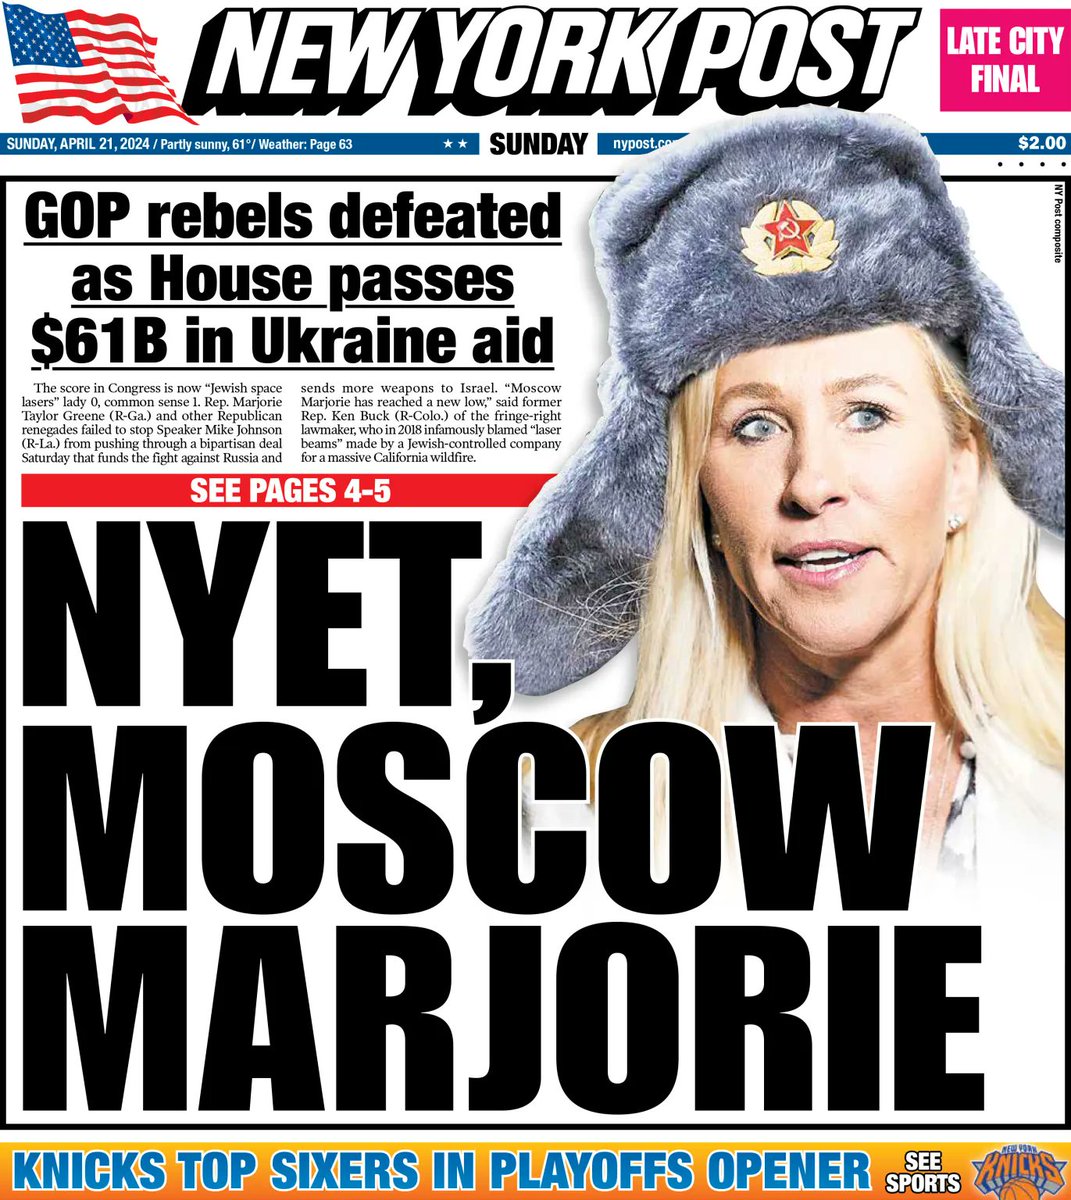 The latest edition of The New York Post featured Republican Marjorie Taylor Greene donning a Russian ushanka hat on its cover Previously, she referred to Speaker Johnson as a Democrat elected from Ukraine and proposed amendments to the Ukraine aid bill suggesting aid be withheld